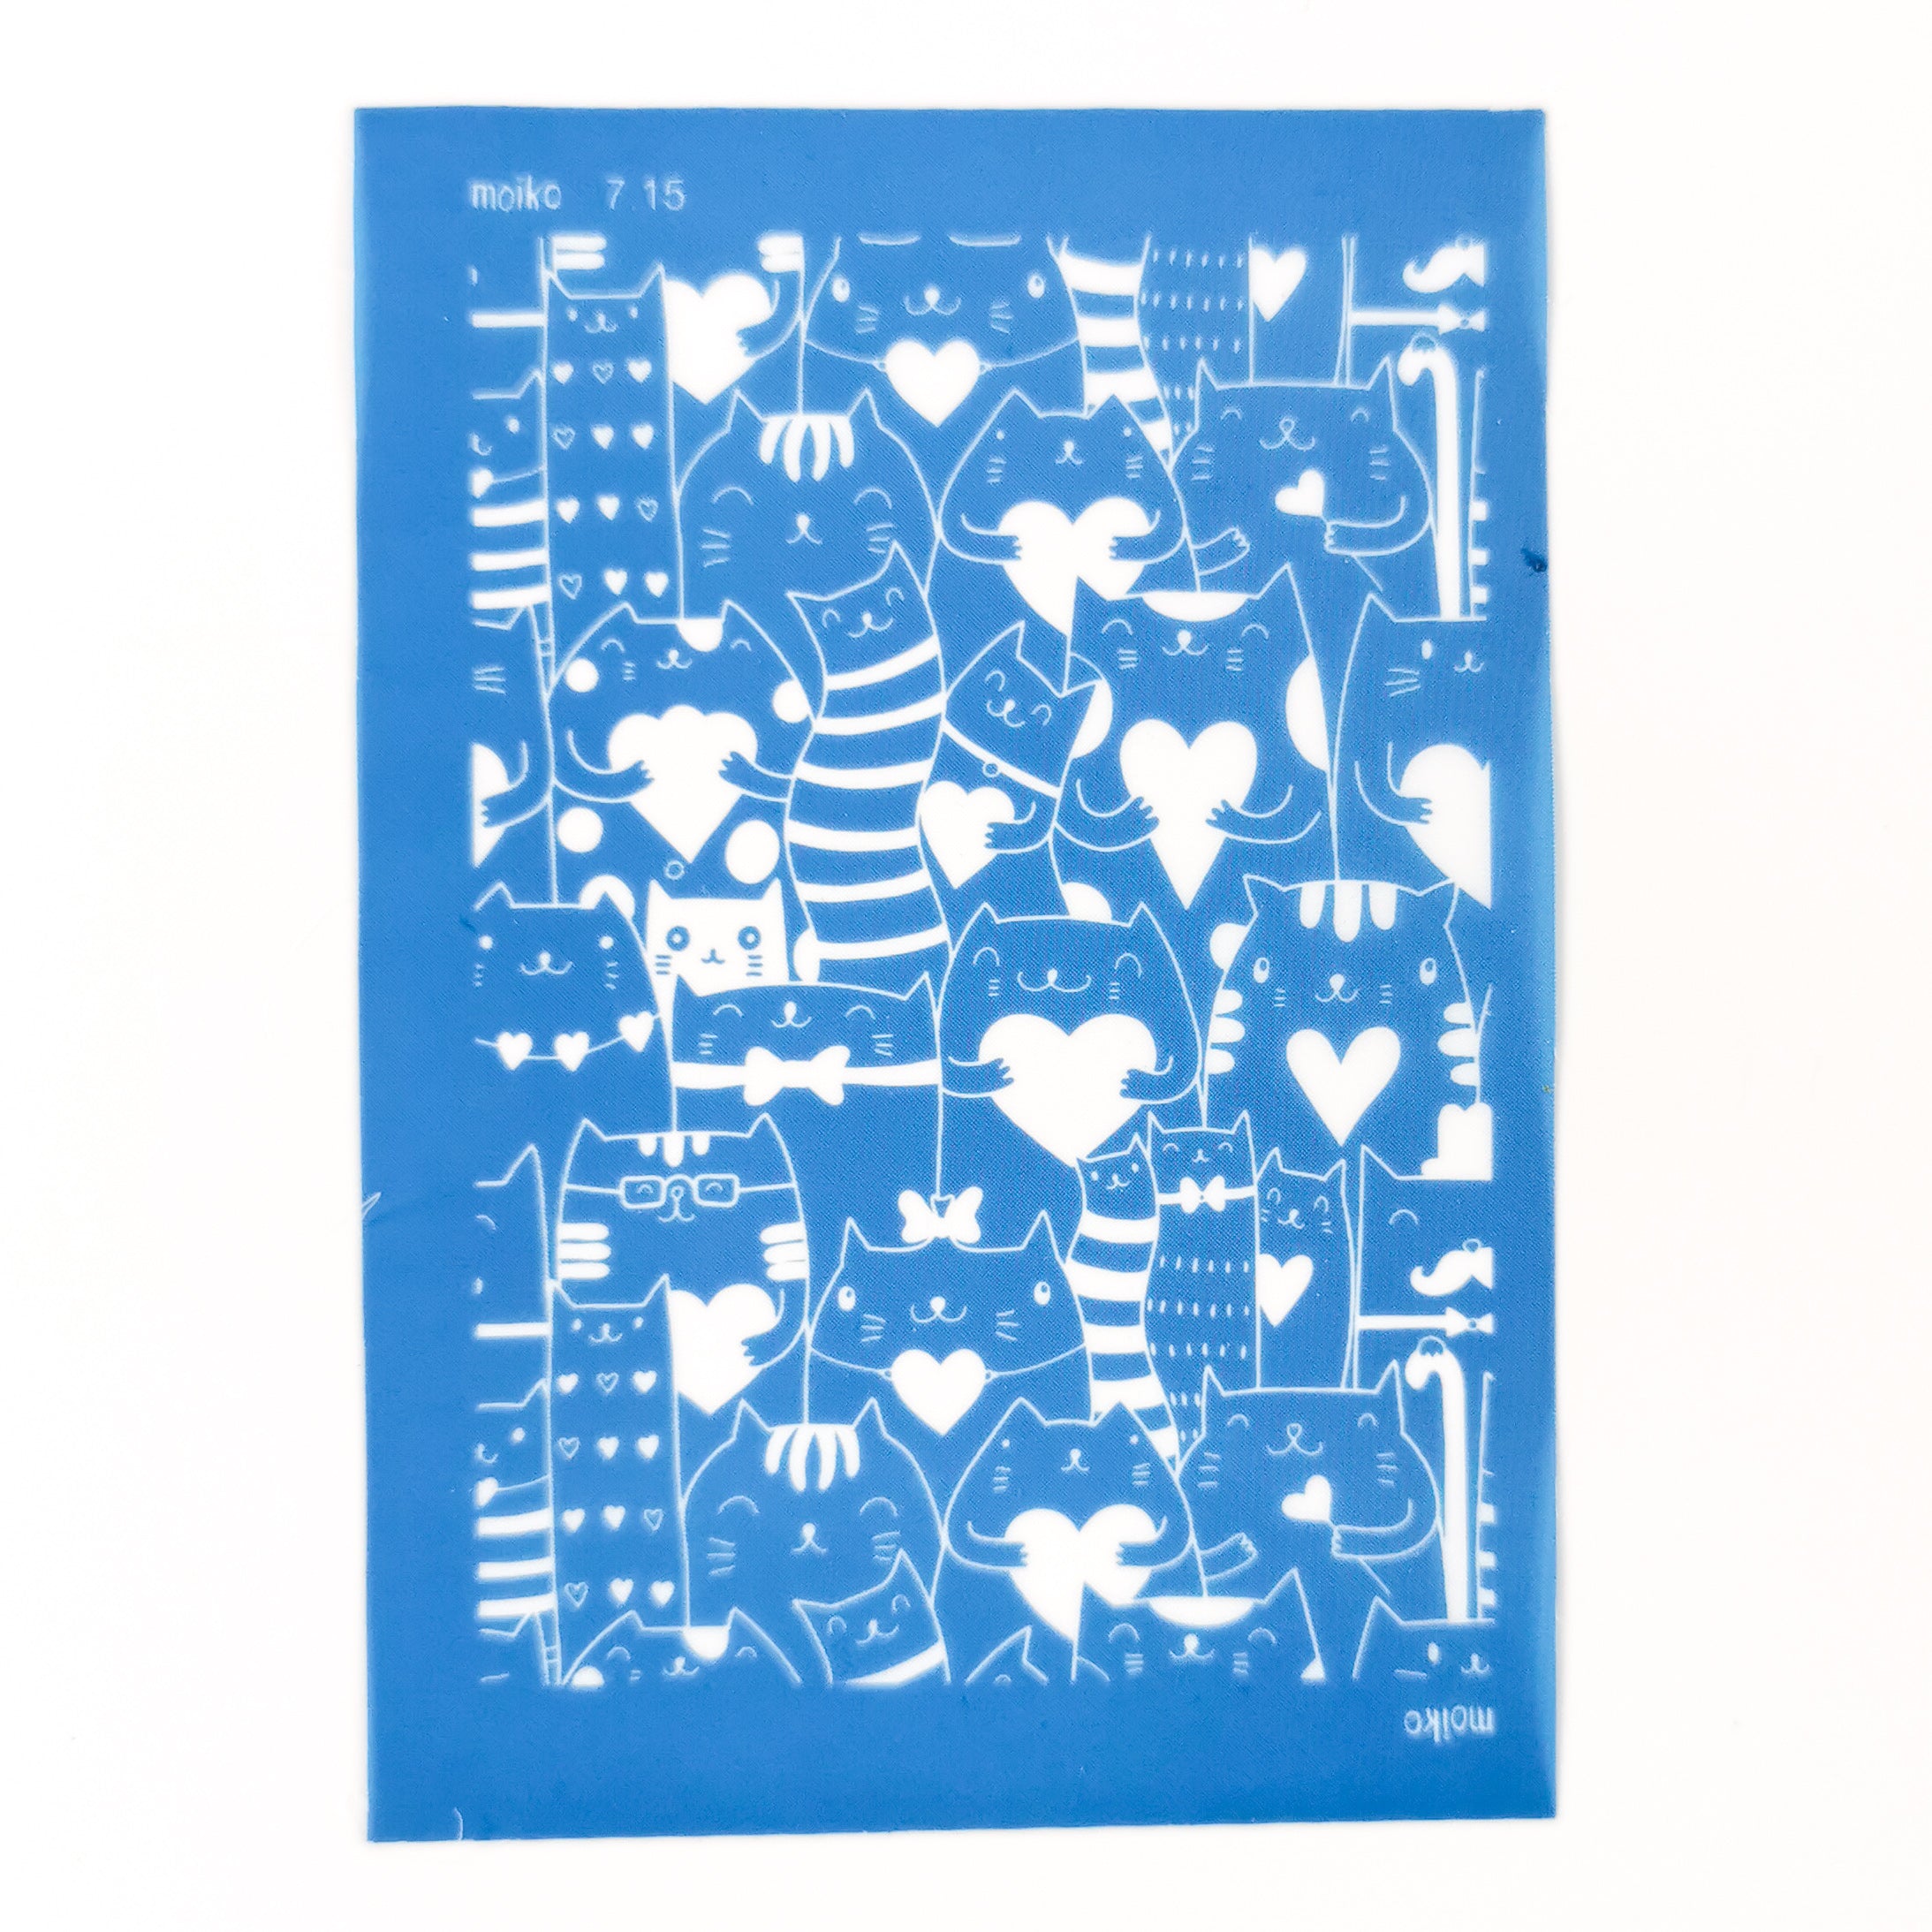 Moiko Silk Screen 7.15 - For The Love Of Cats